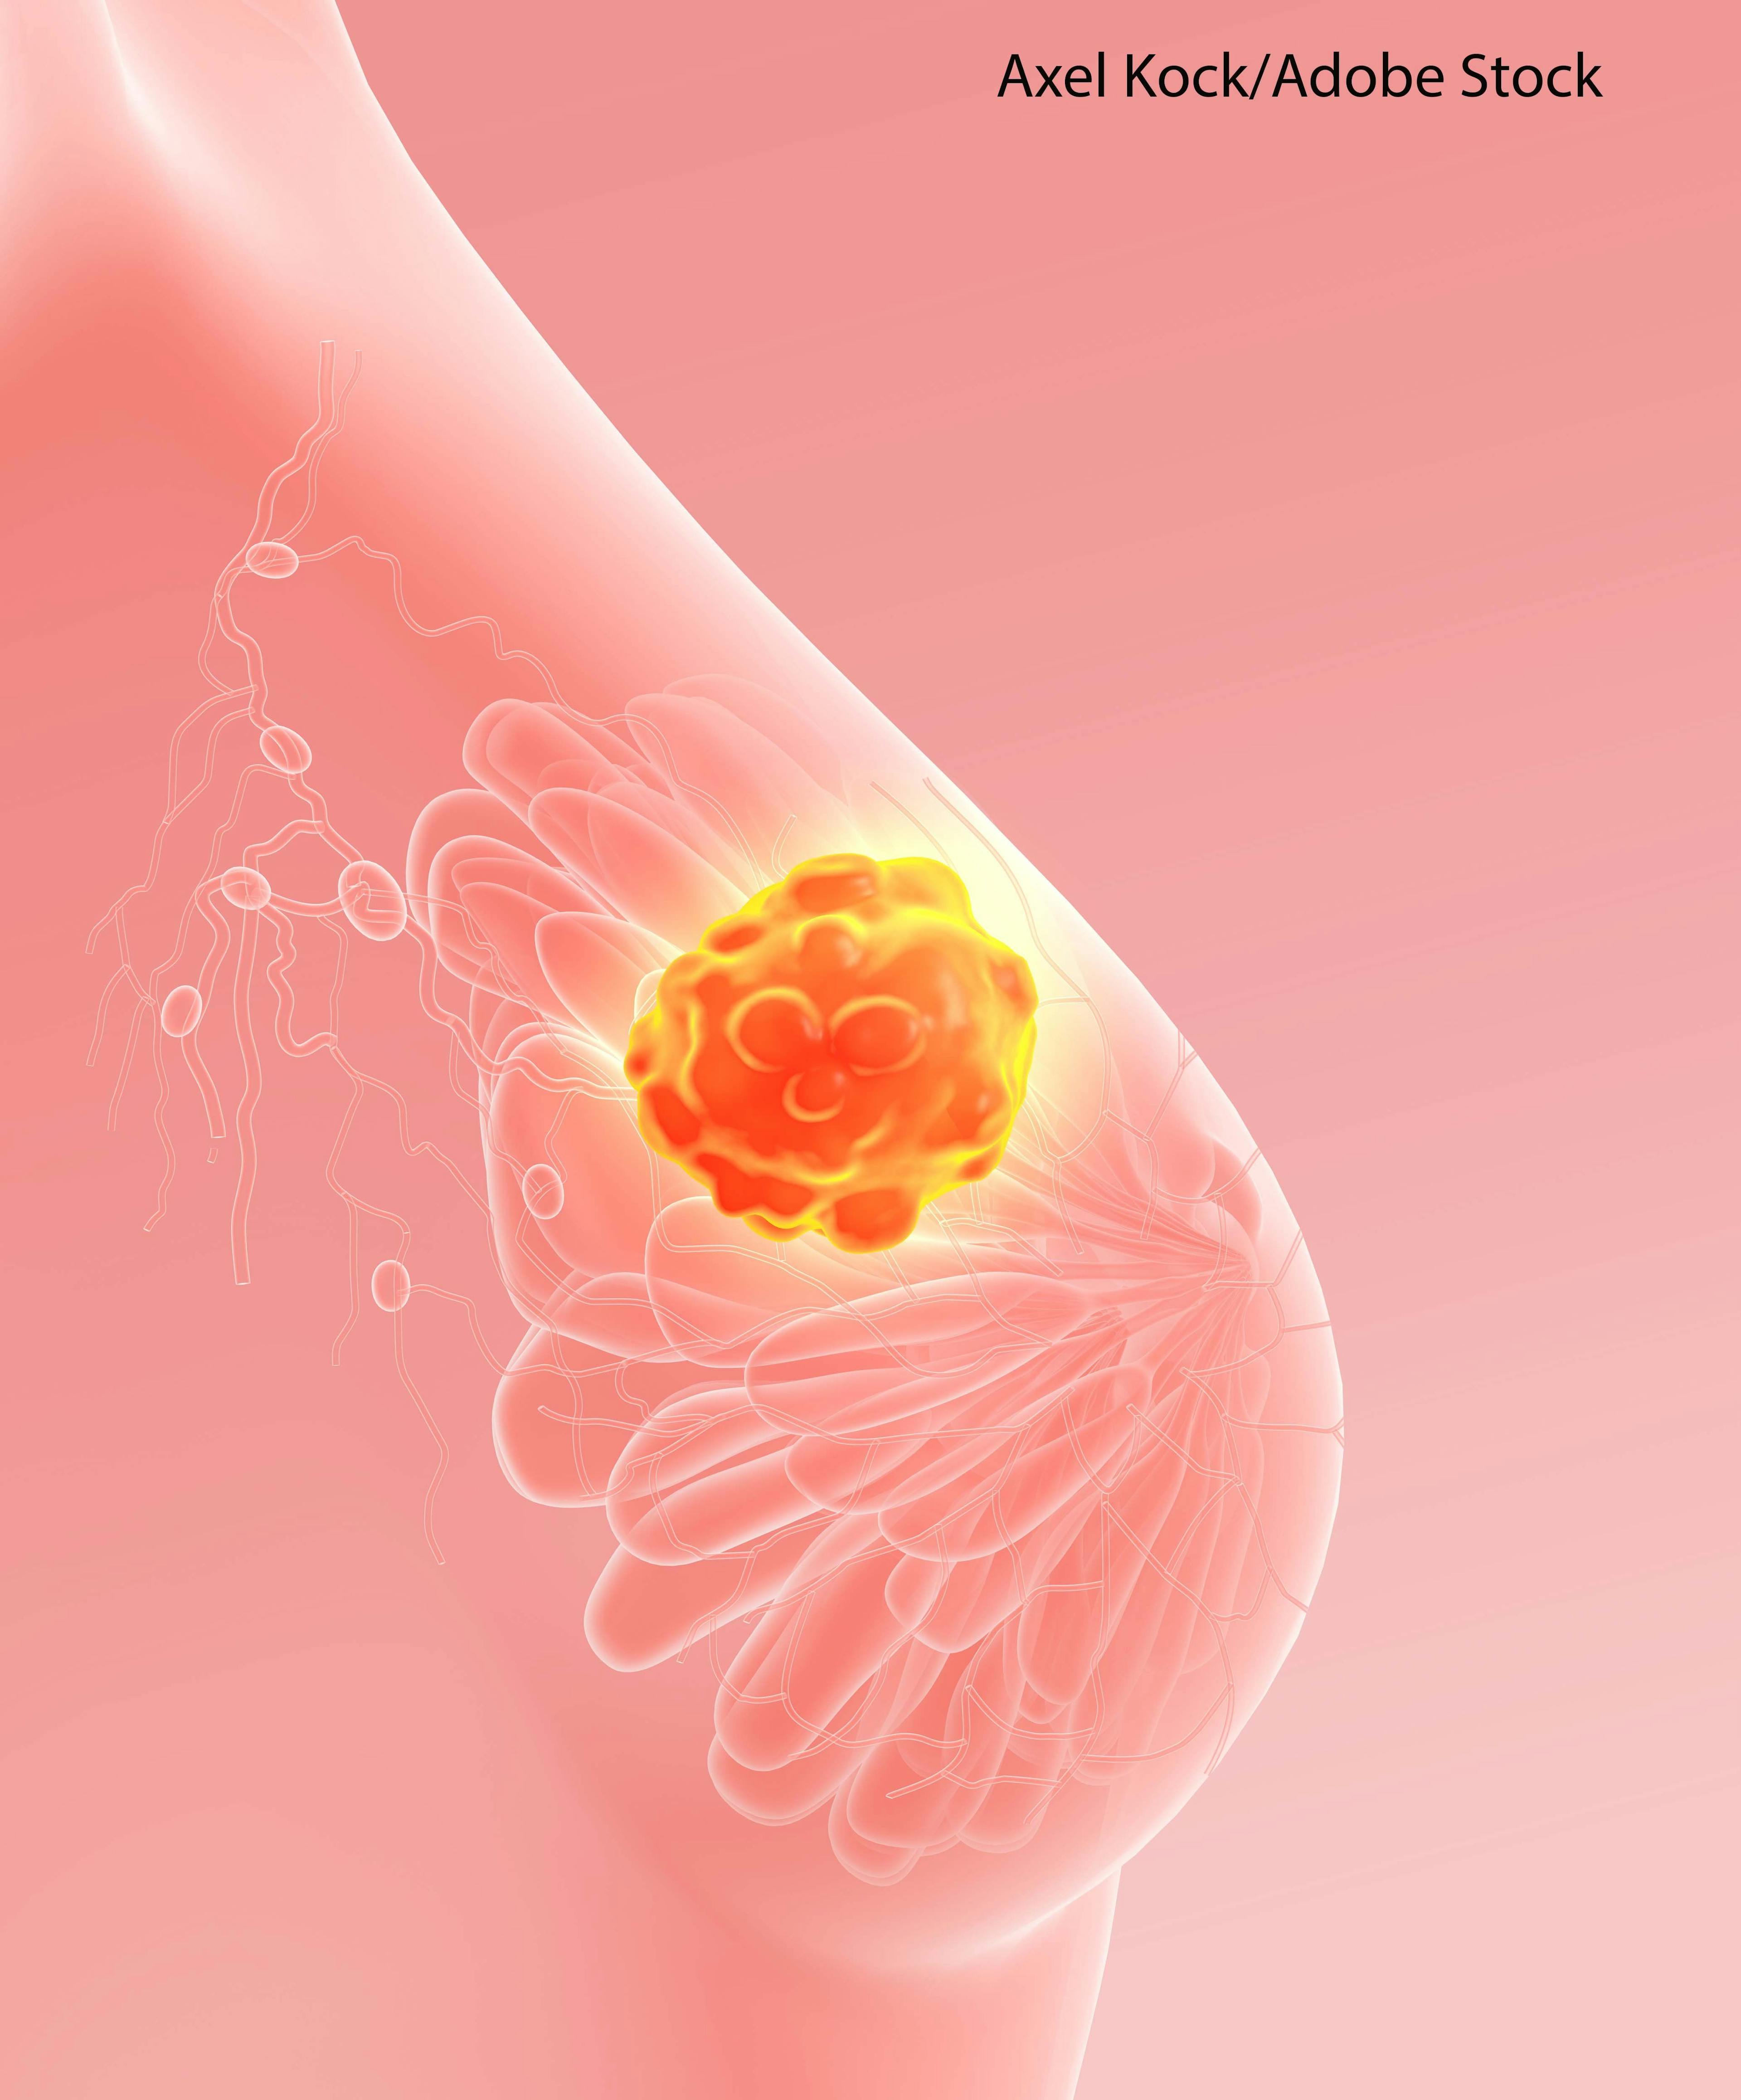 Breast Cancer Incidence Rising Cannot be Attributed to Changes in Parity